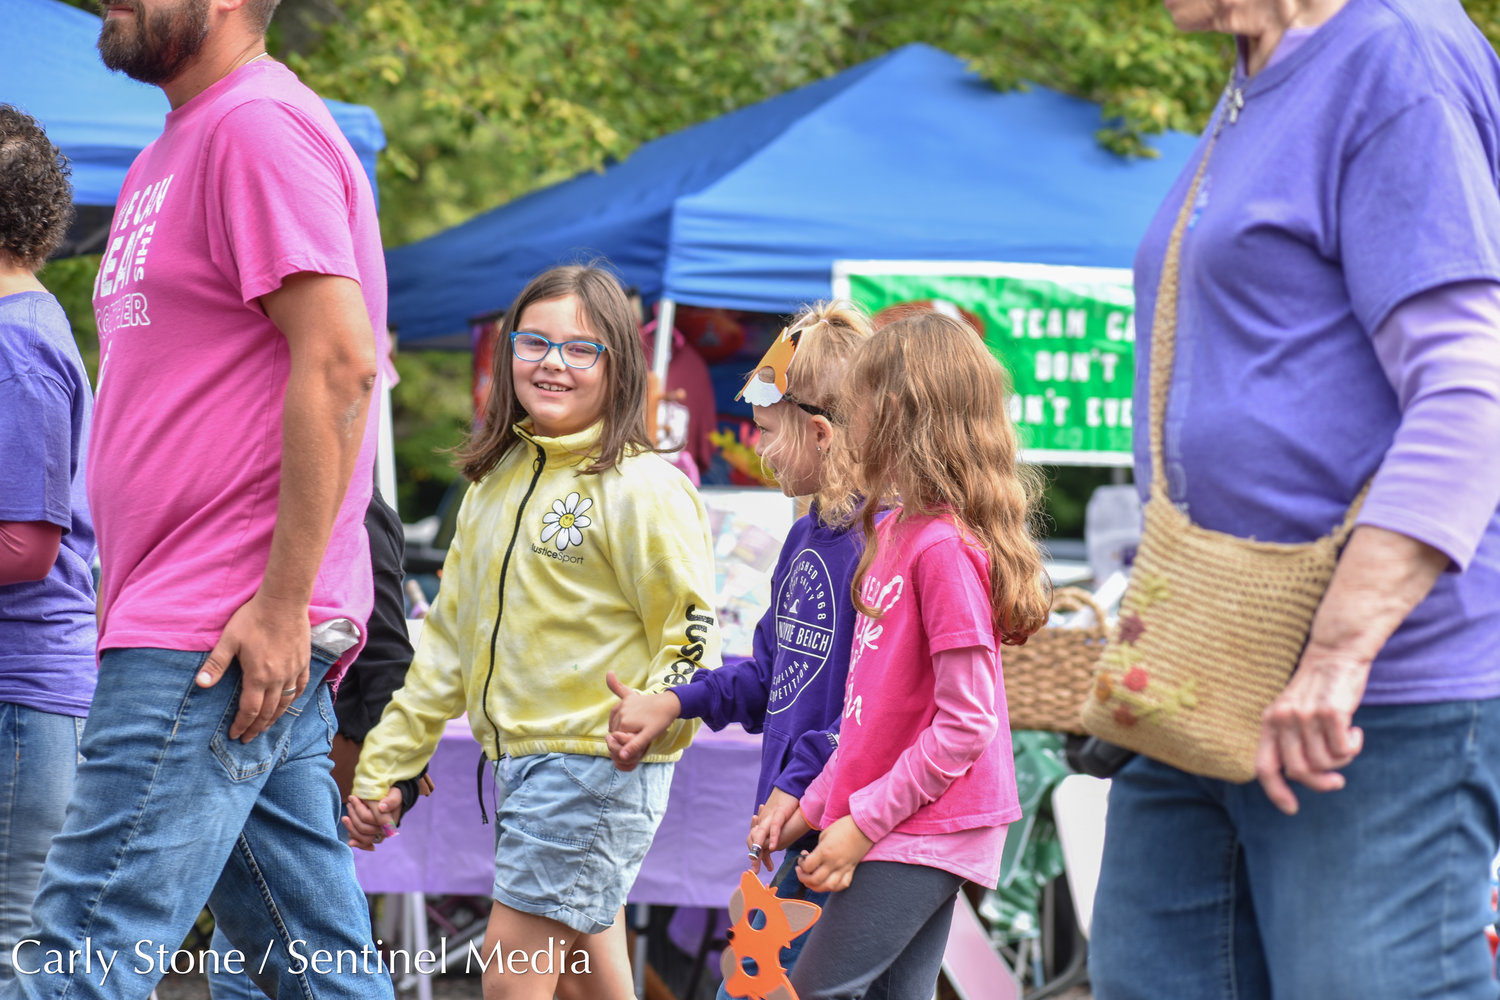 Several children participated in Relay for Life of CNY on September 17, 2022. The event was fitted with its own kids' station including crafts, face painting, and more.